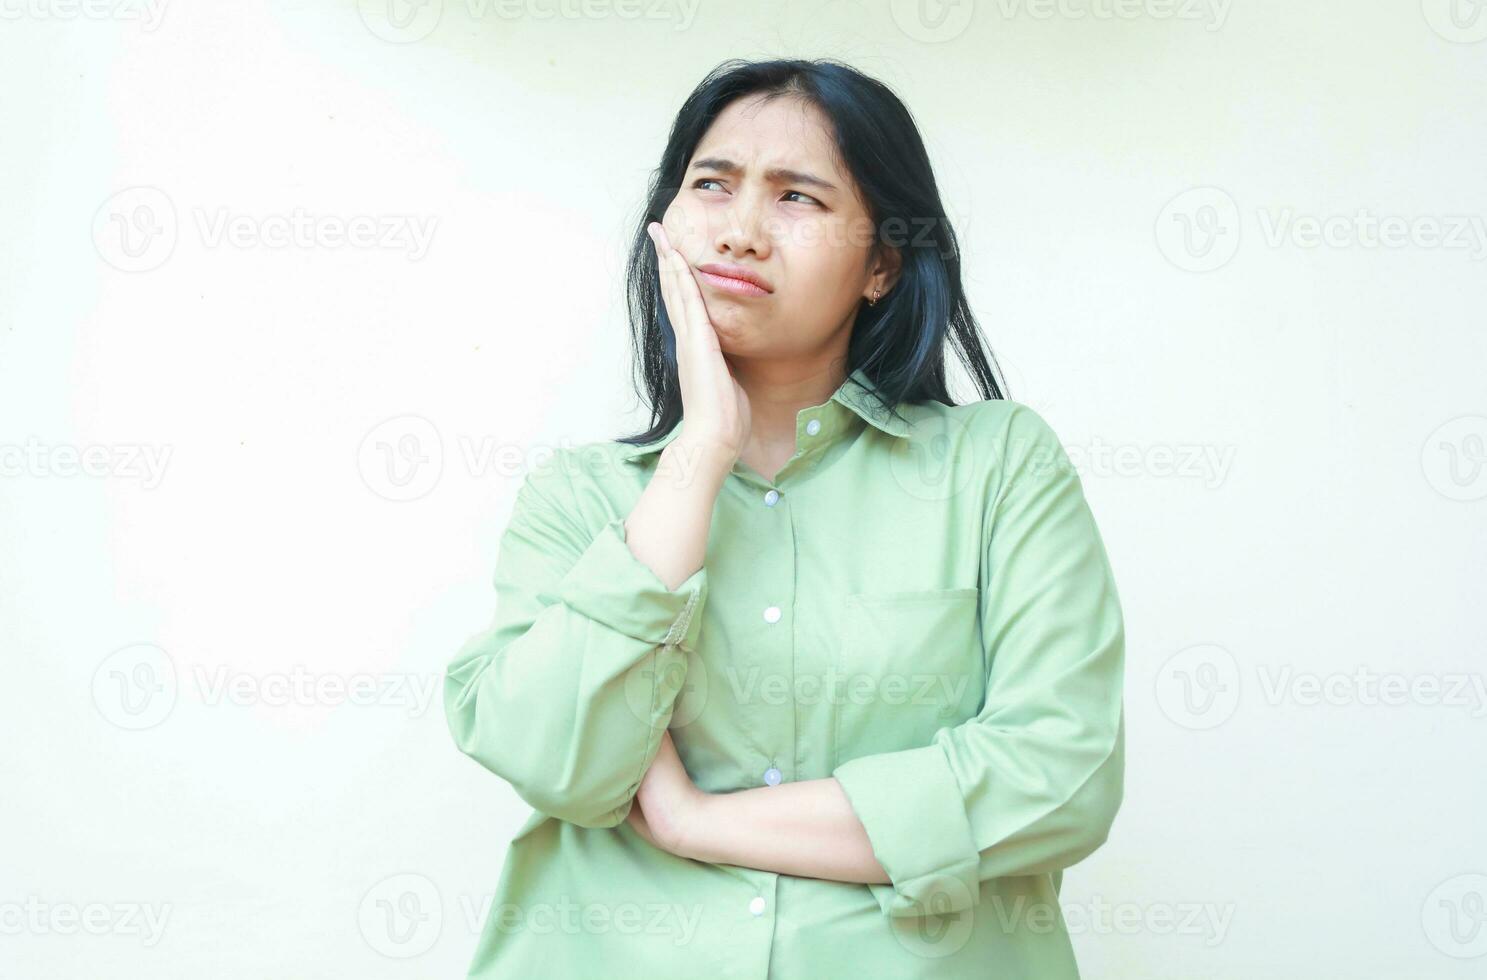 depressed asian woman with dark hair looking away show sad gloomy face expression with folding arms and hands on chin wearing green oversized shirt isolated on white background photo